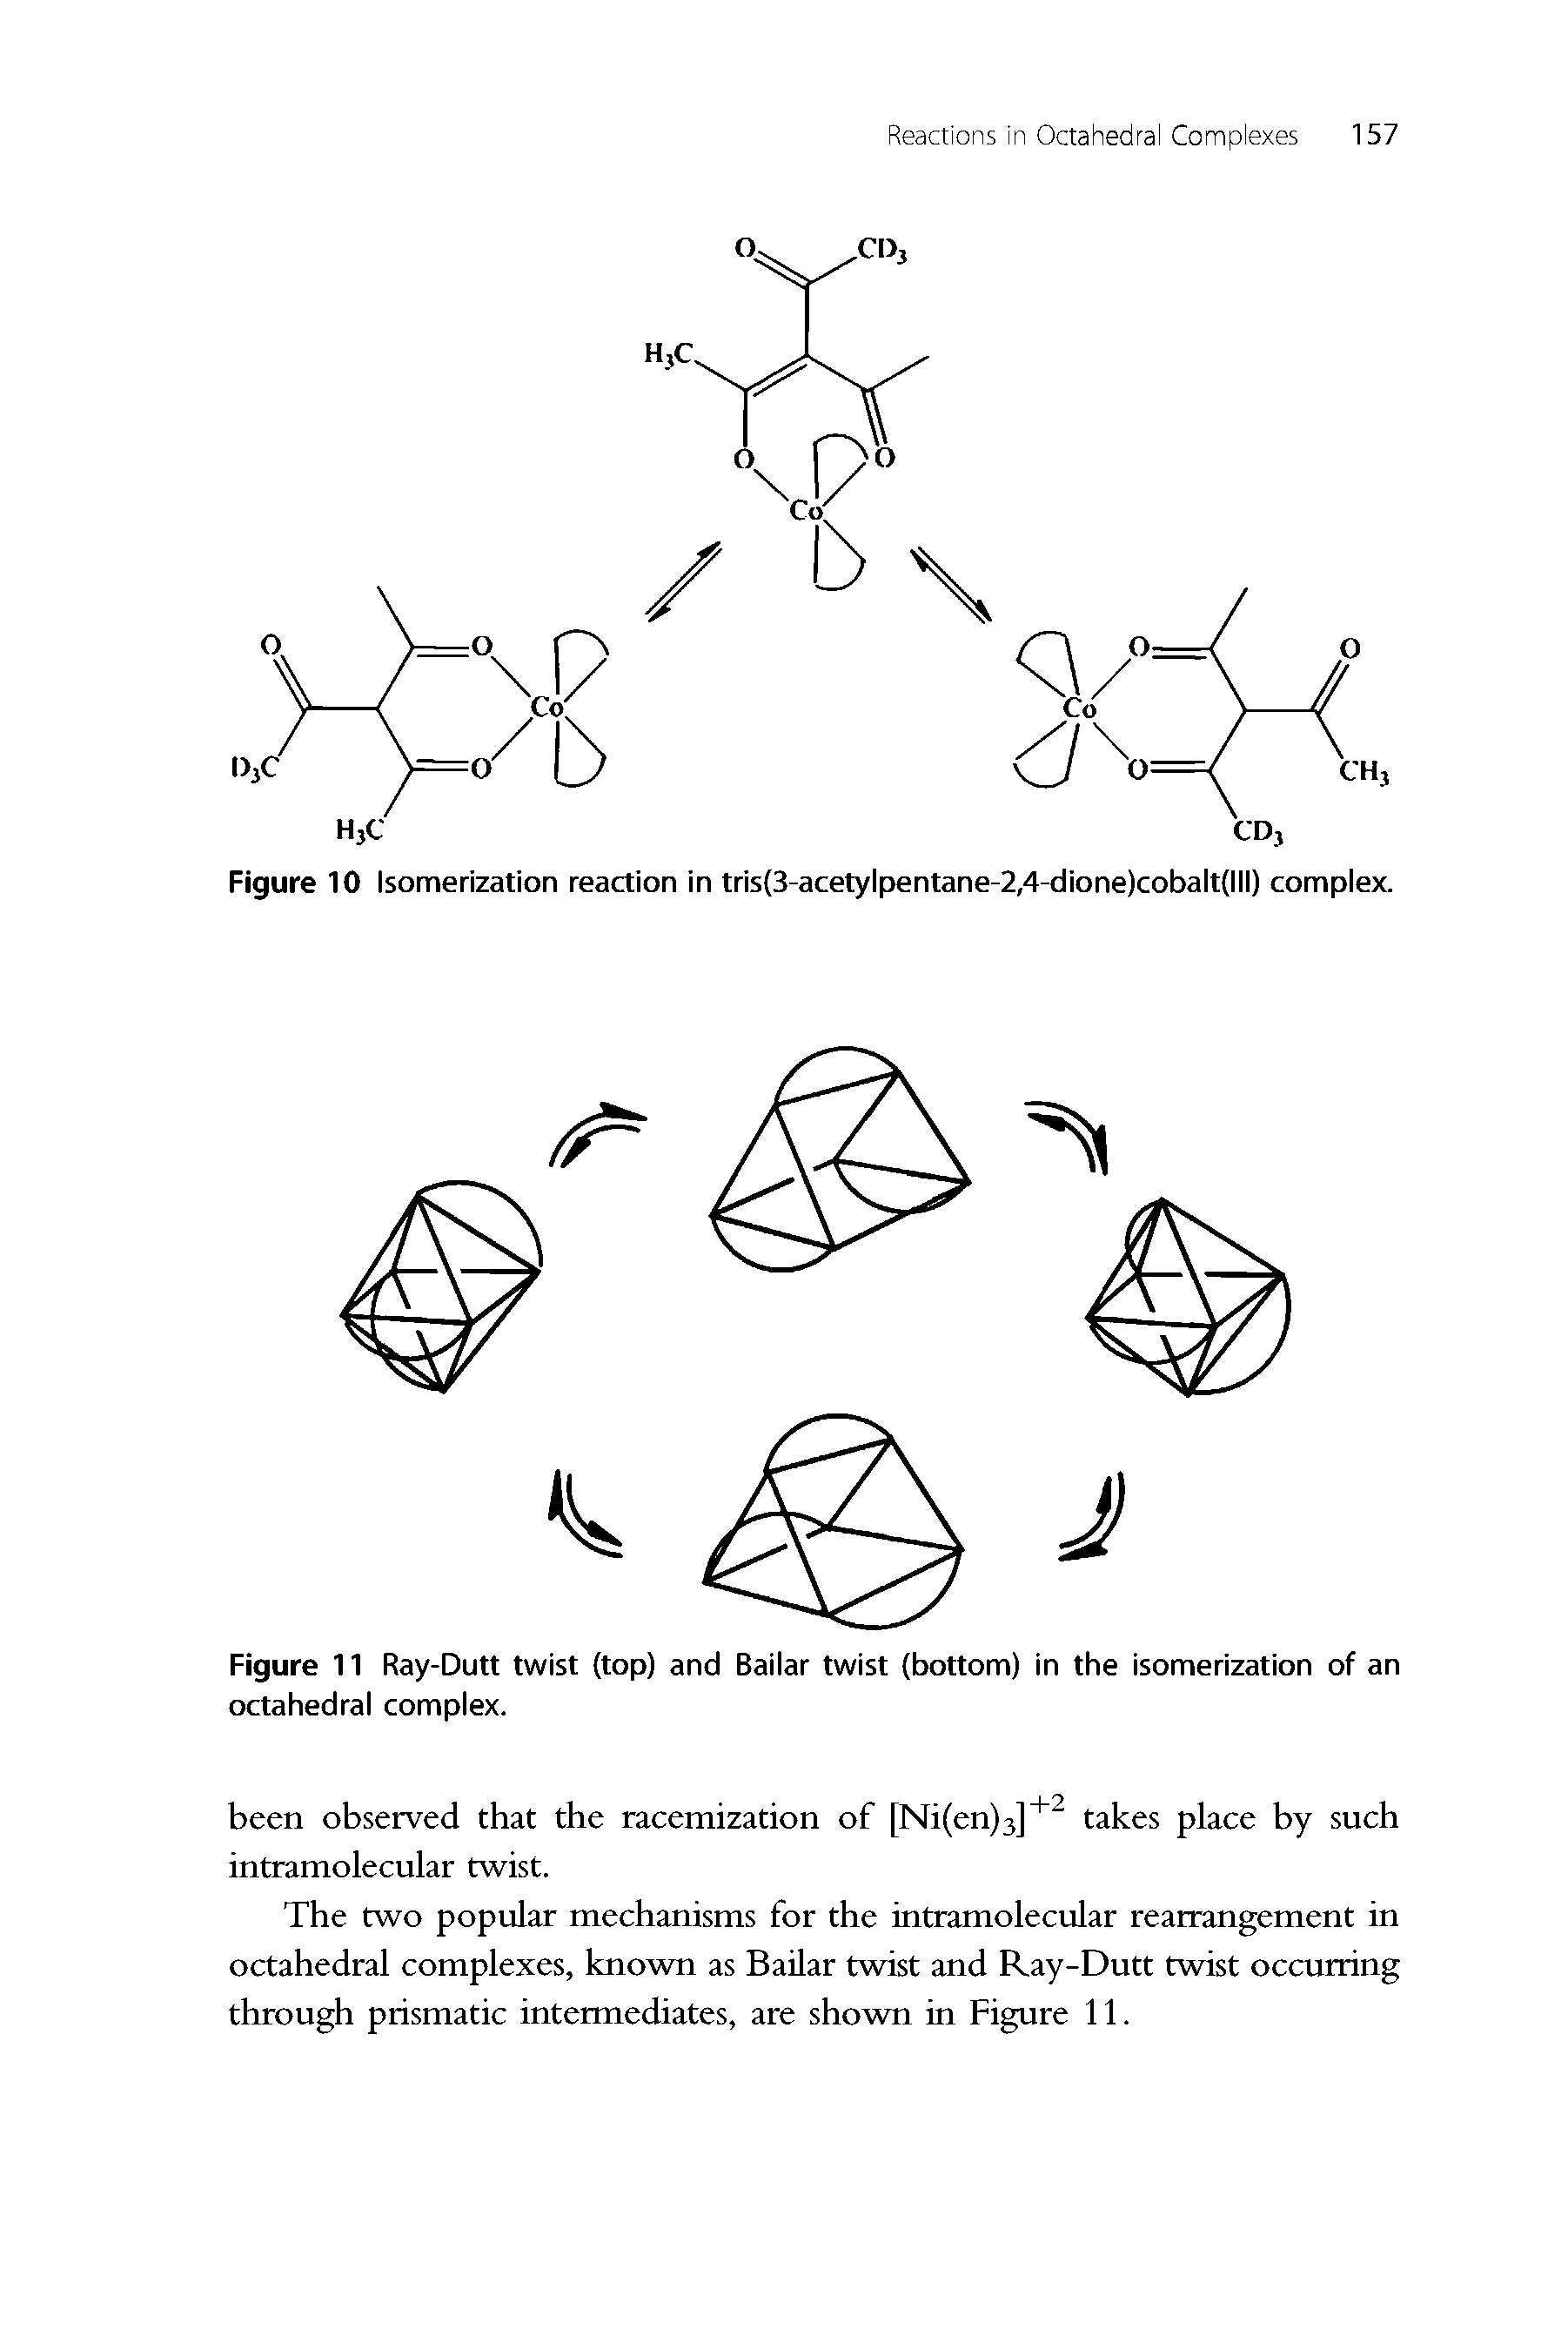 Figure 11 Ray-Dutt twist (top) and Bailar twist (bottom) in the isomerization of an octahedral complex.